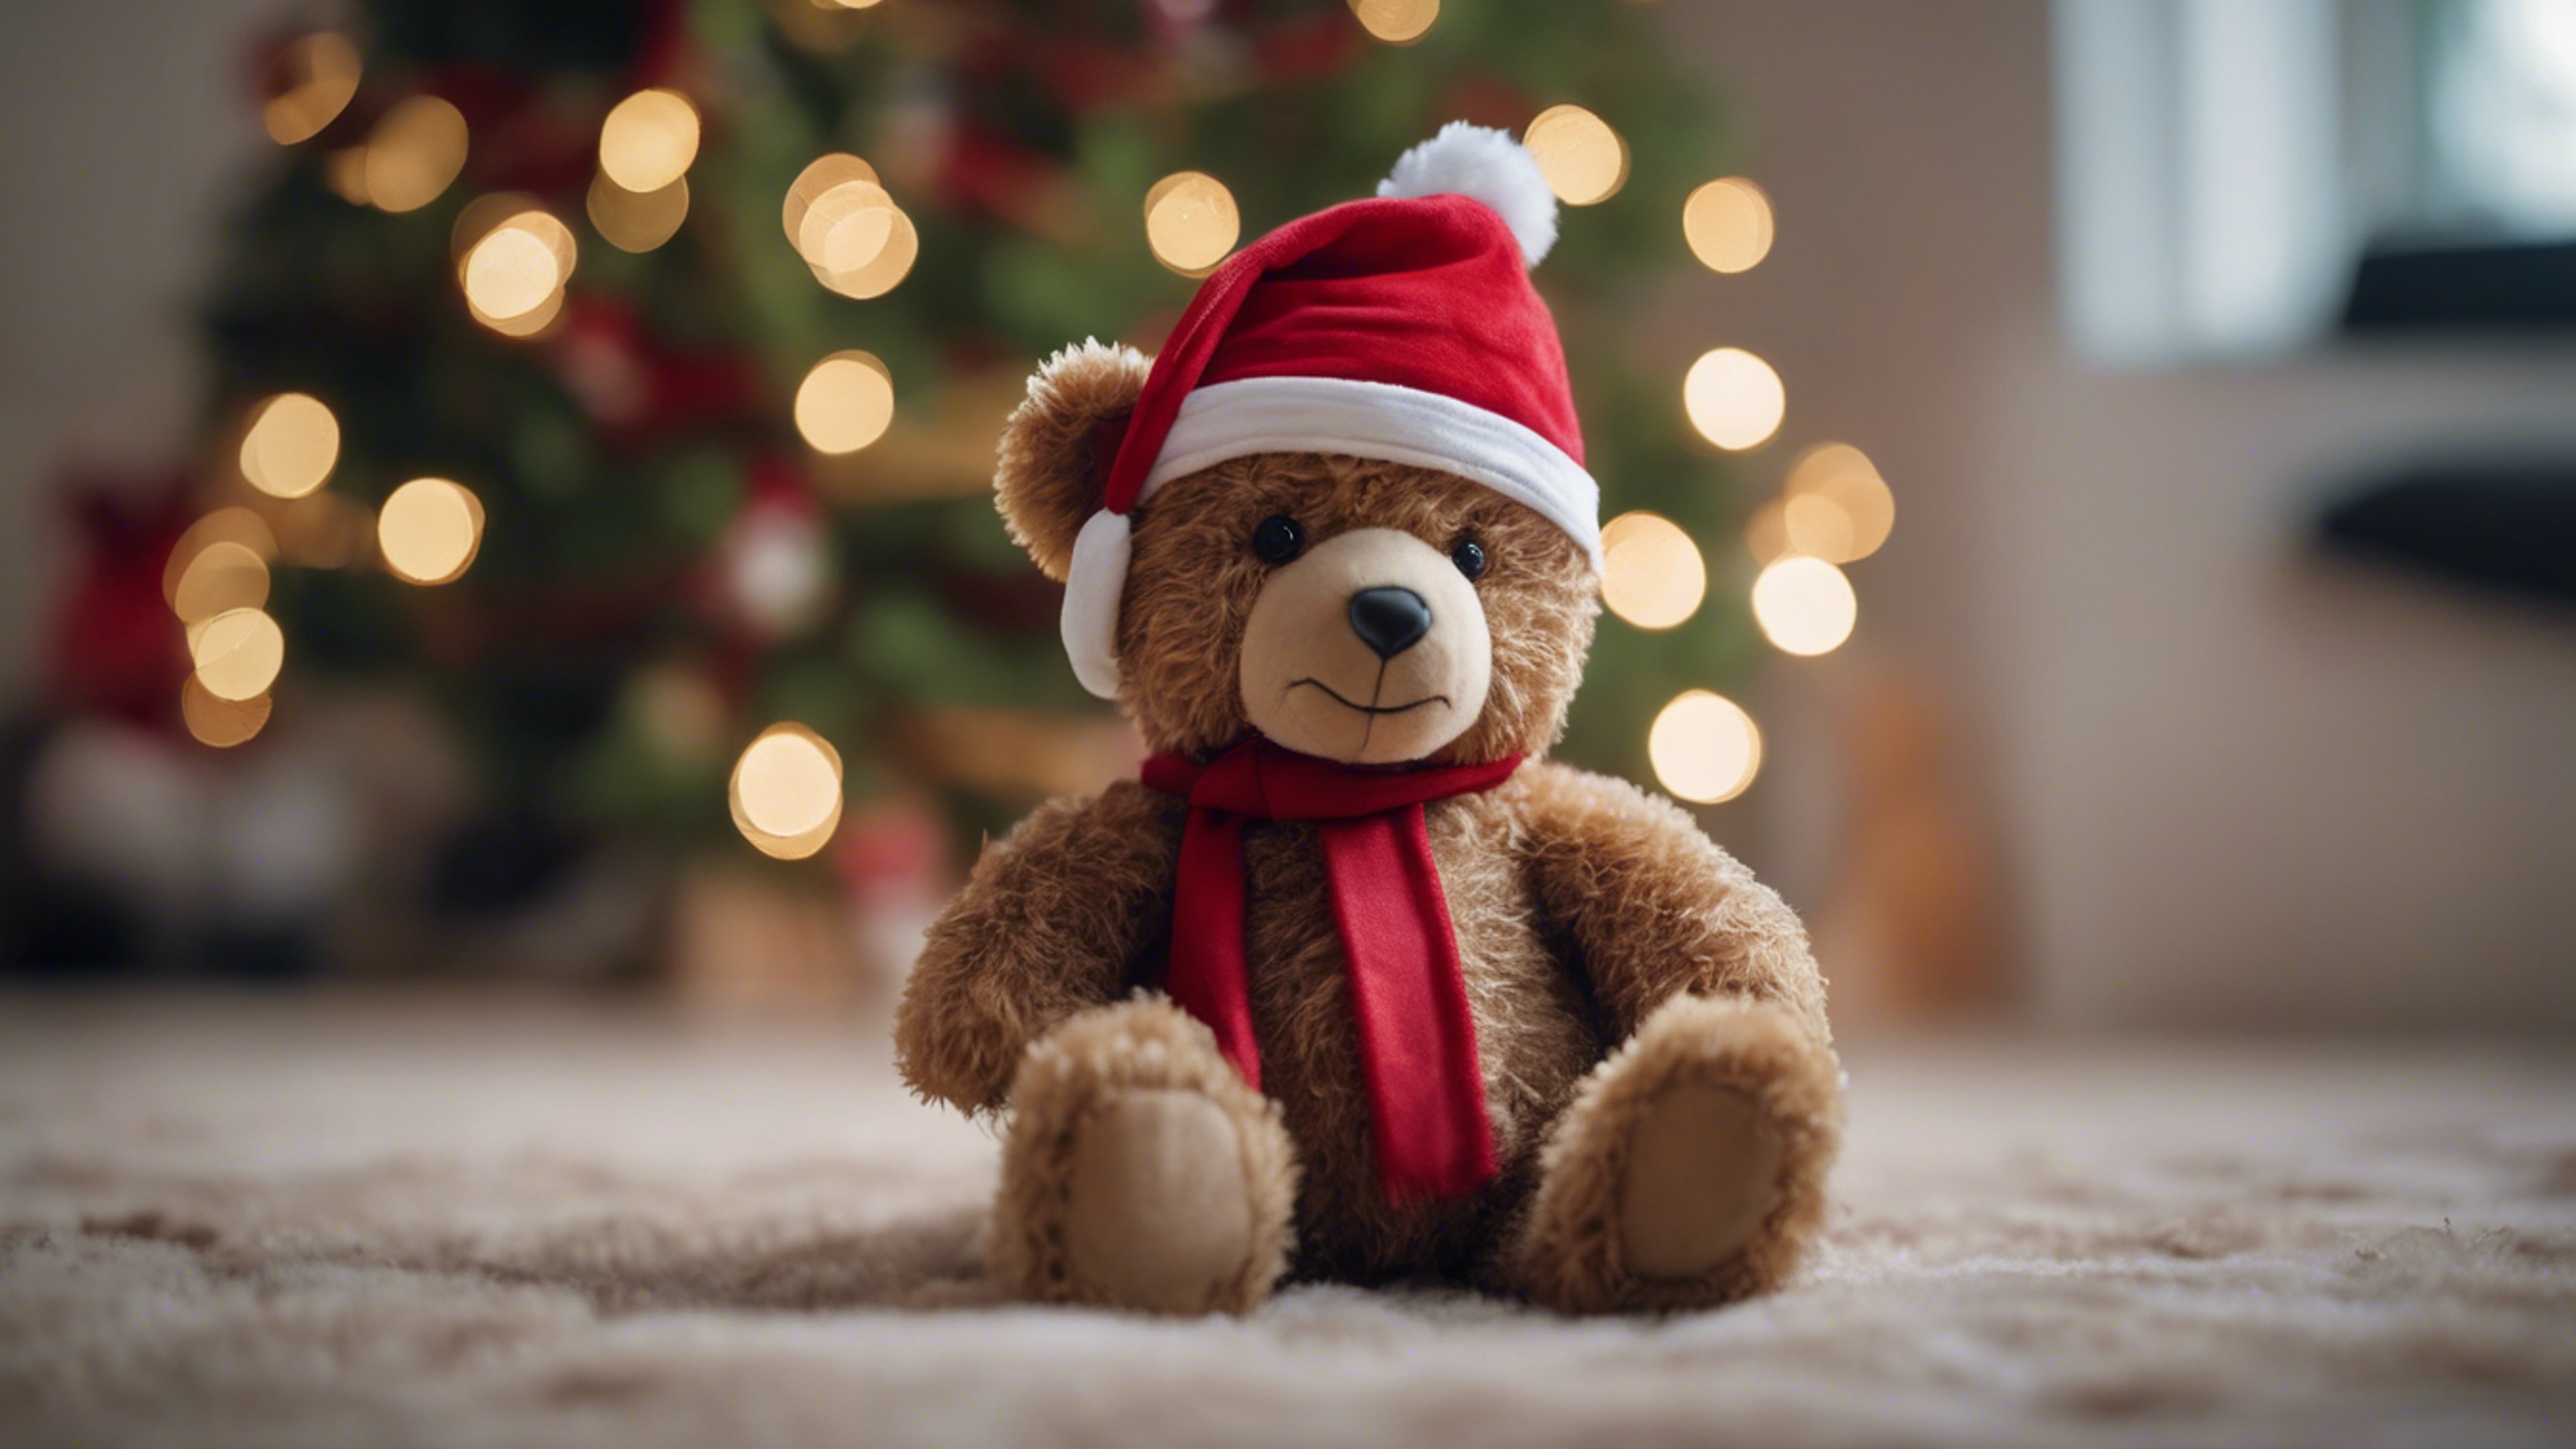 A teddy bear wearing a red Christmas hat, sitting next to a Christmas tree. Taustakuva[764052ee6d604b67a698]